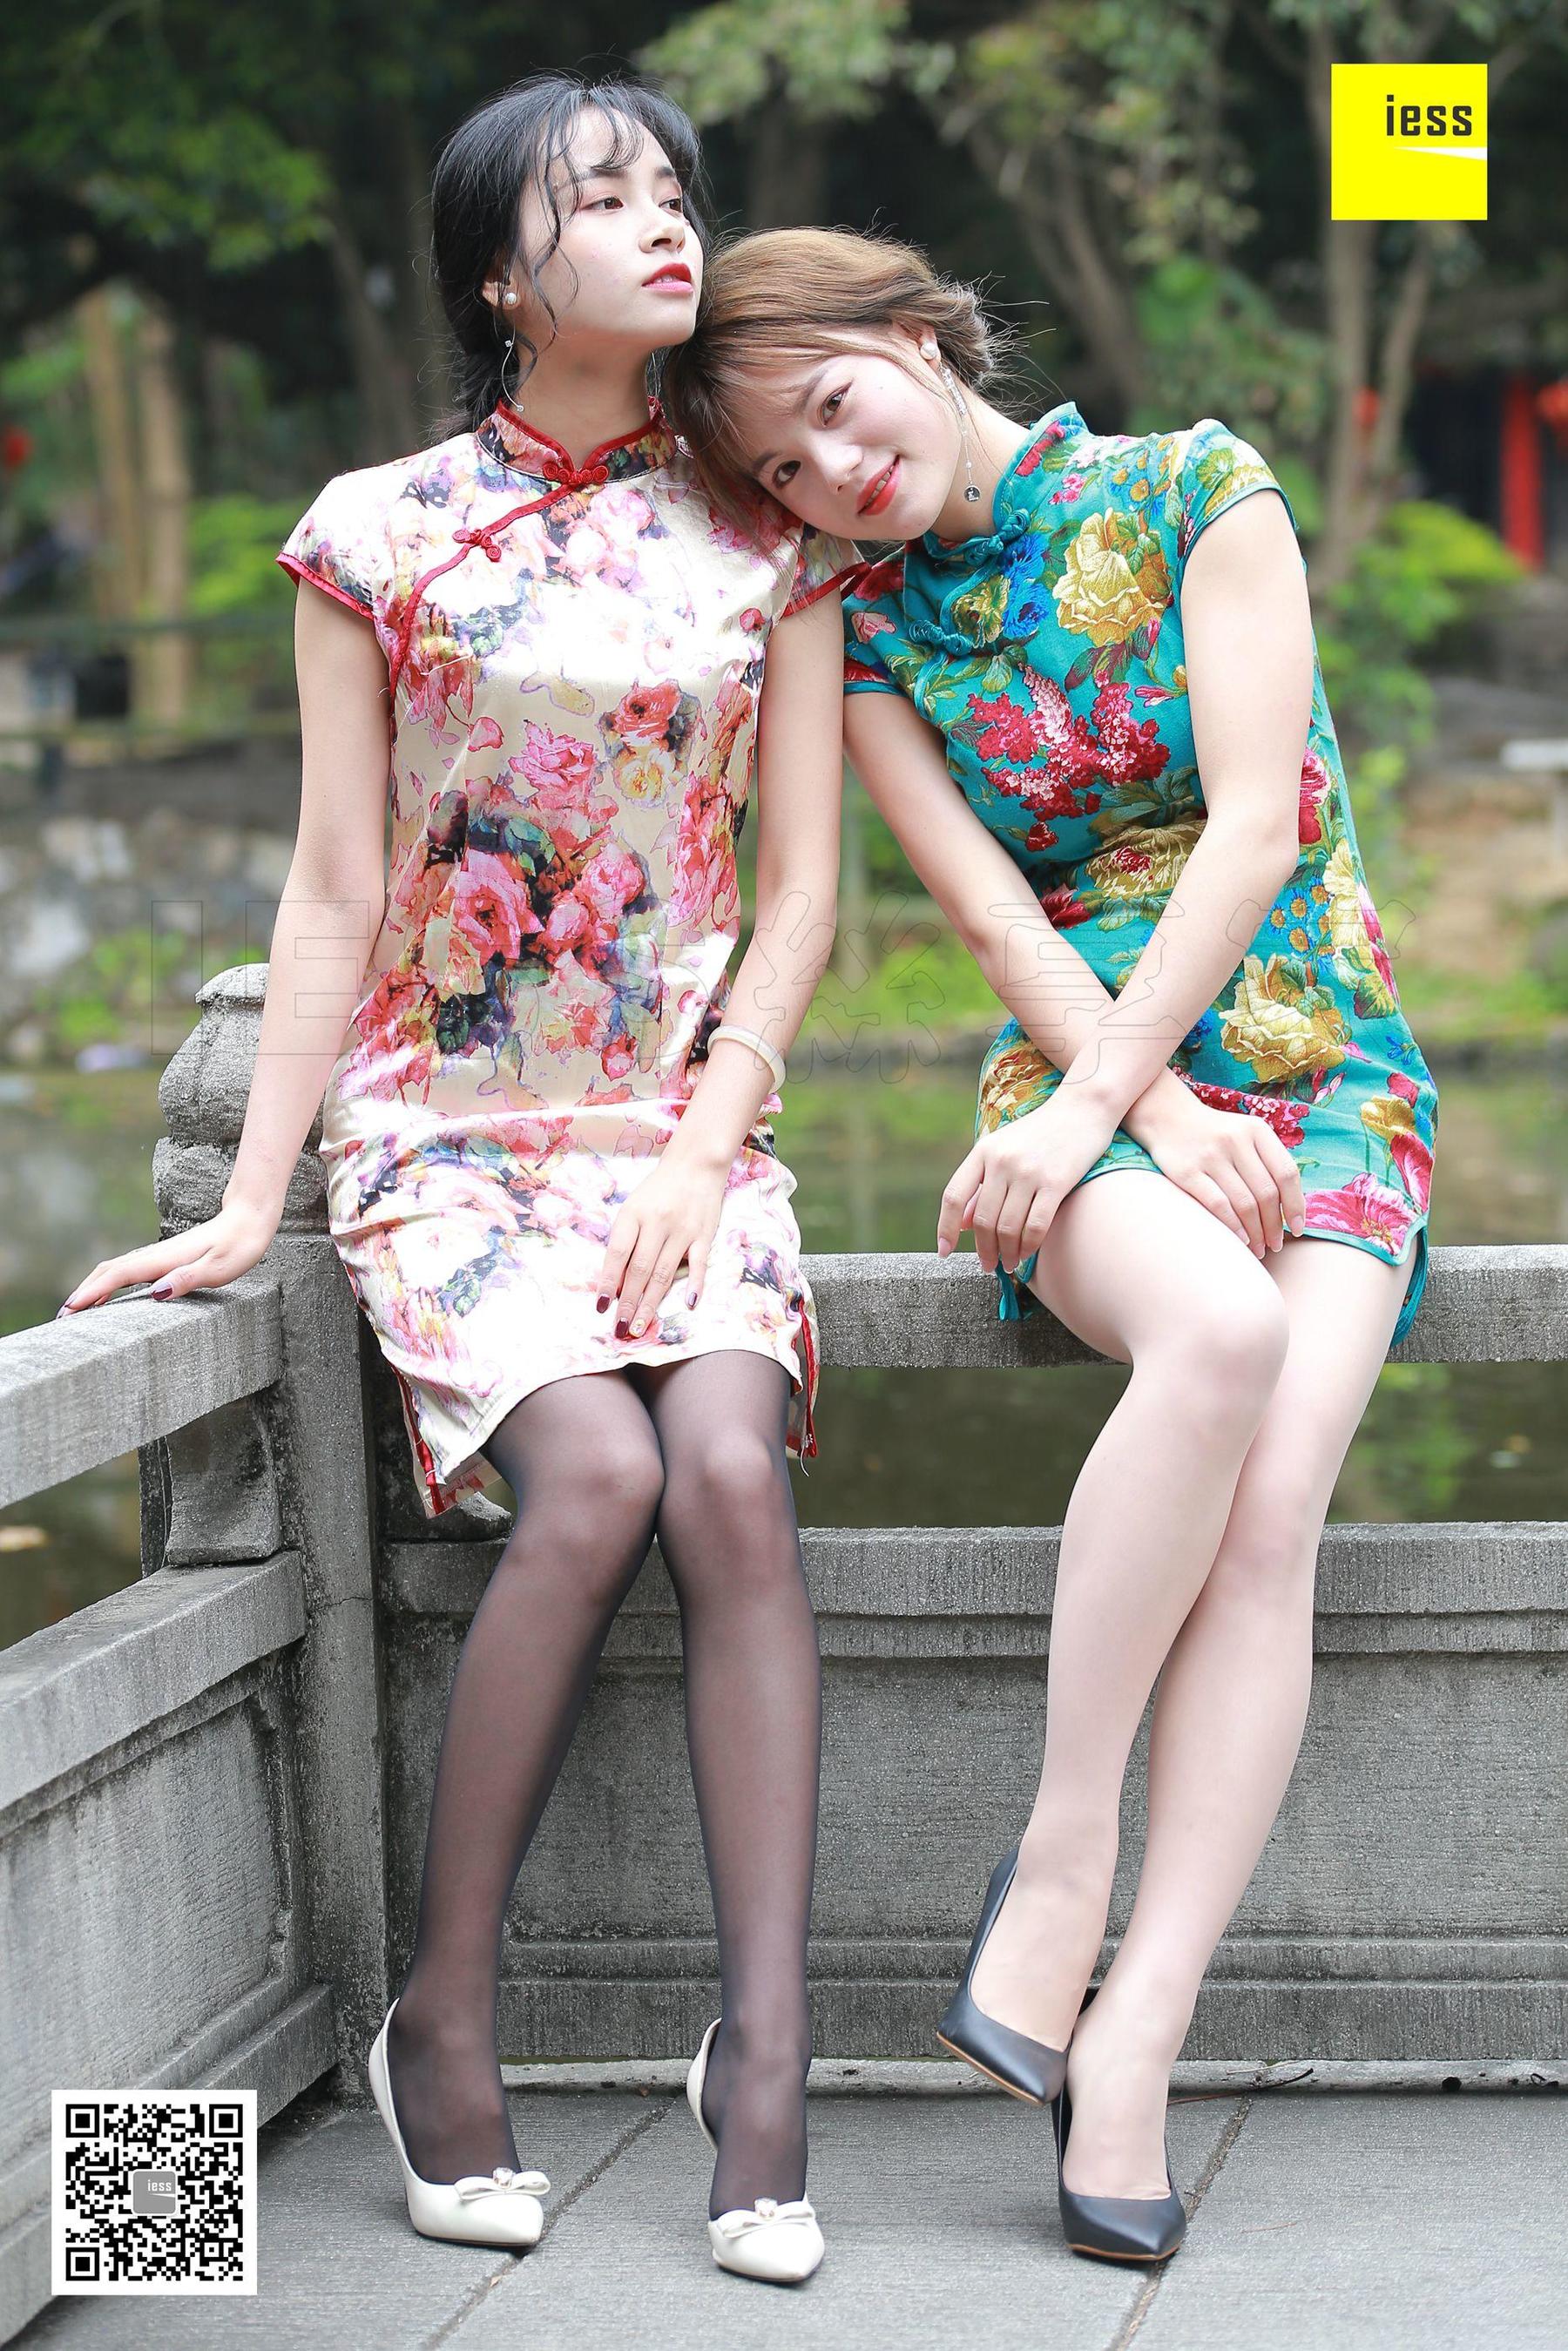 Shuying & amp; Huahua's Cheongsam Period Flowers Different Thoughts to IESS Devil on Wednesday Special issue 12